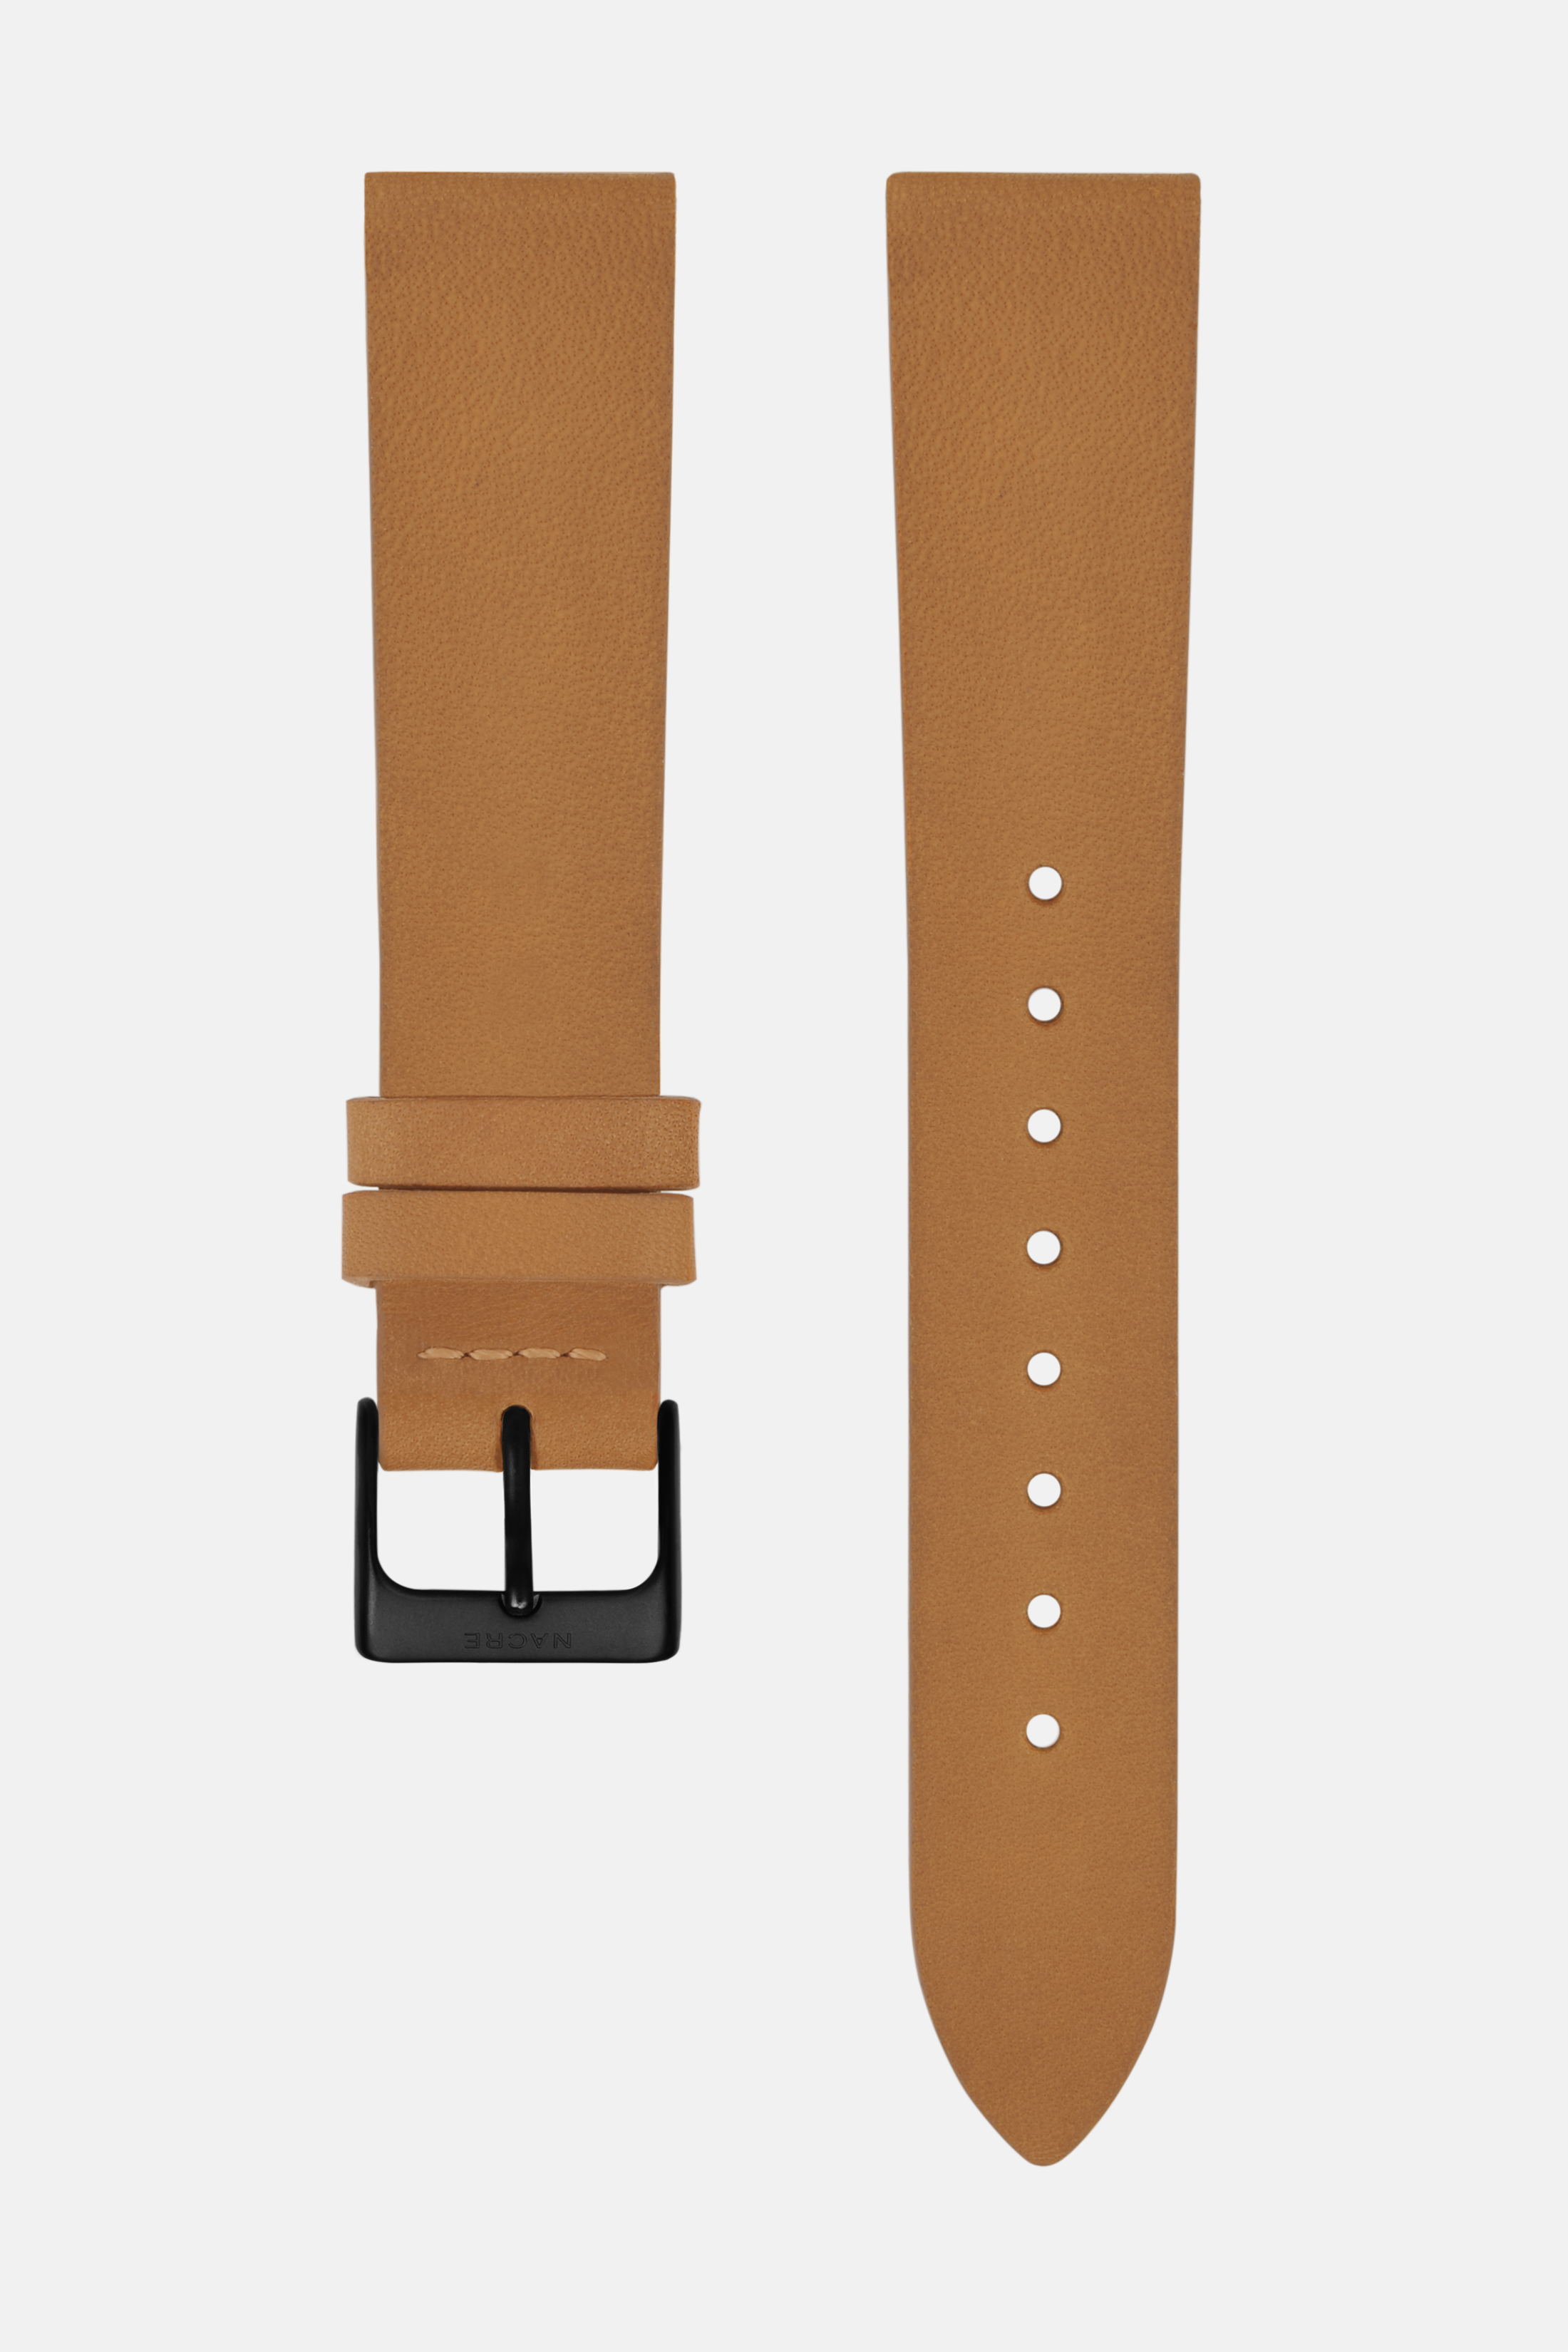 Strap - Italian Leather - Natural Leather - Matte Black